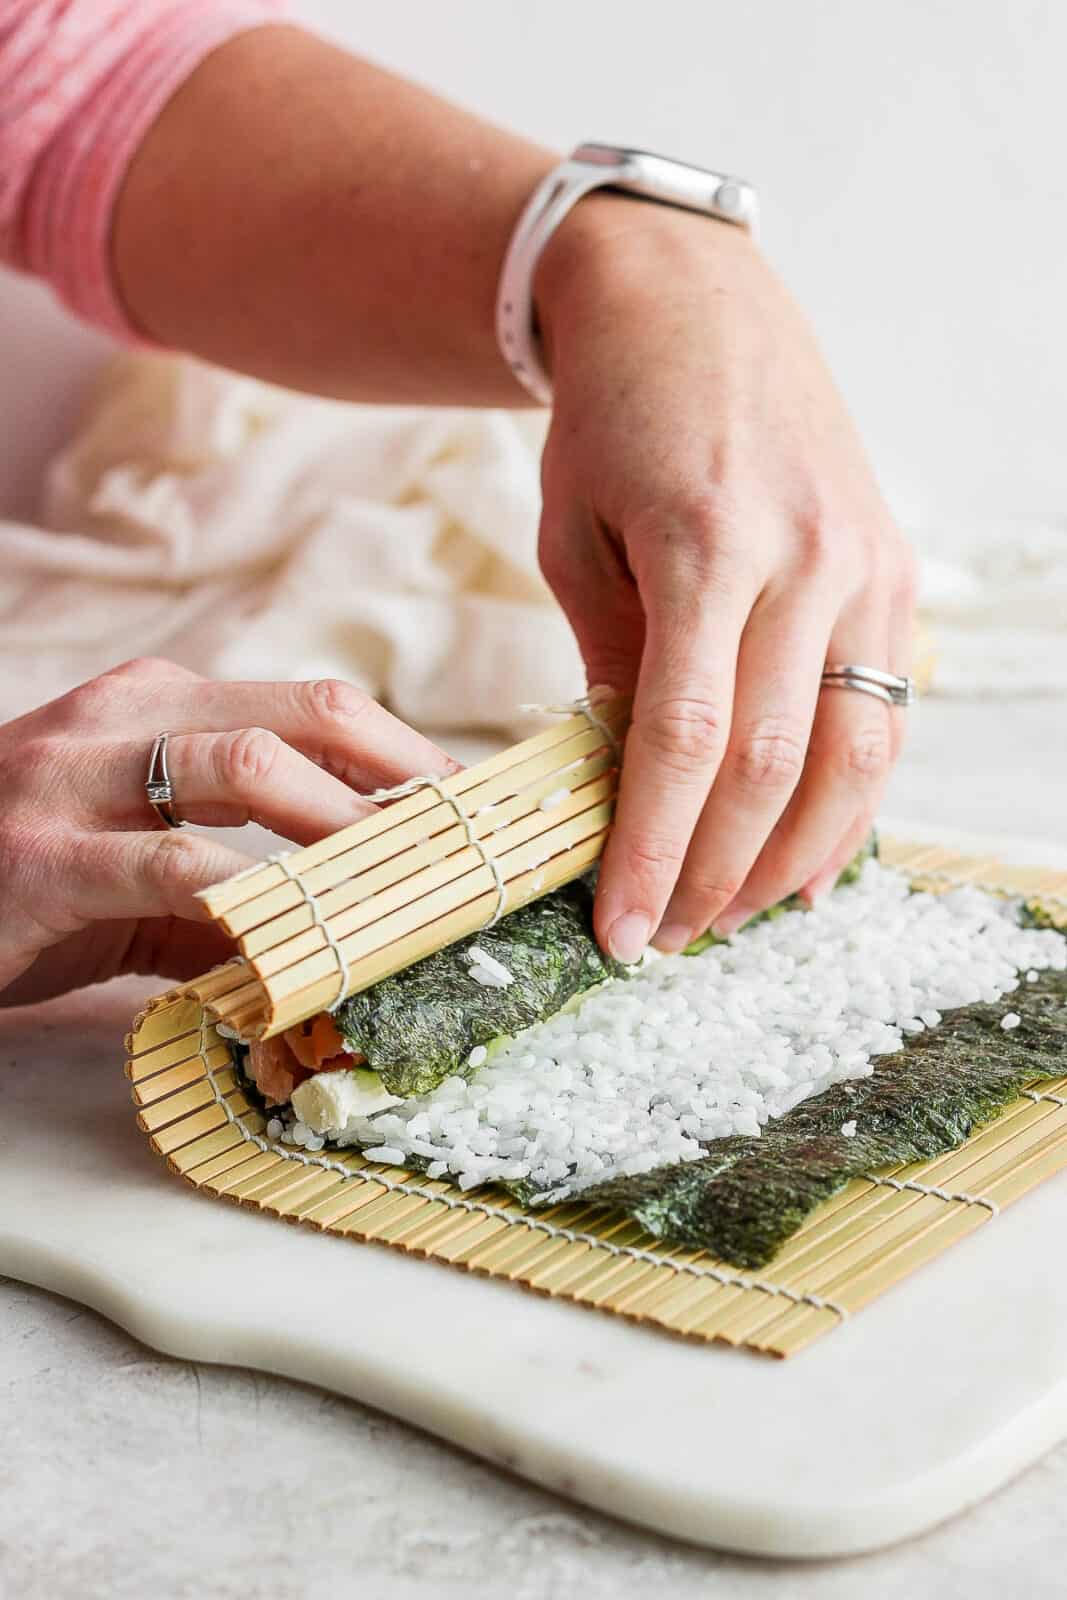 Two hands using the bamboo sheet to begin rolling the sushi roll.